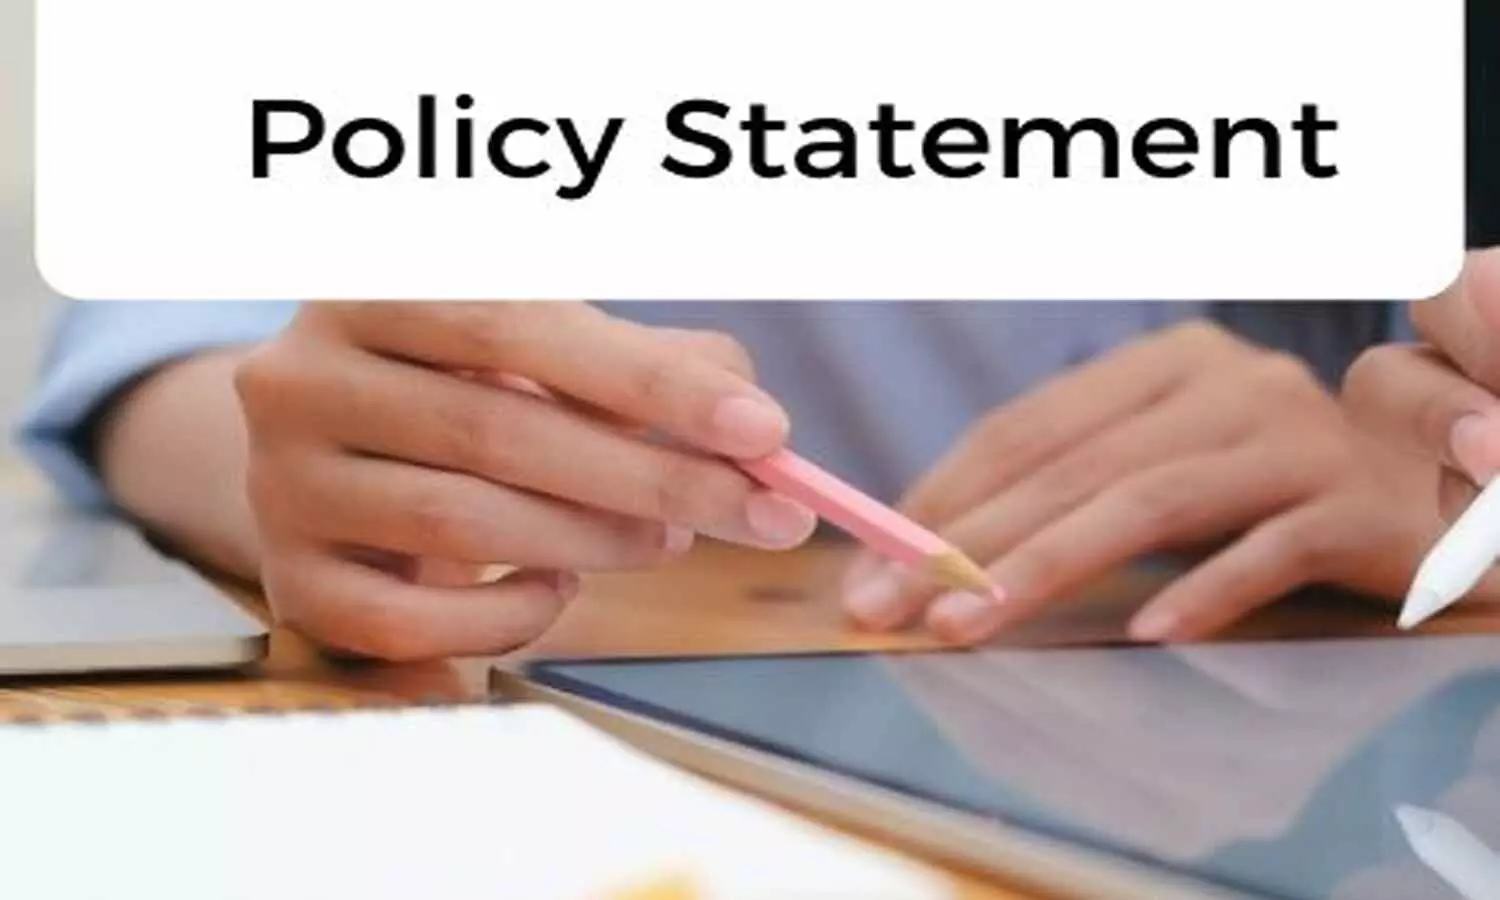 New policy statement on barrier protection for adolescents: AAP